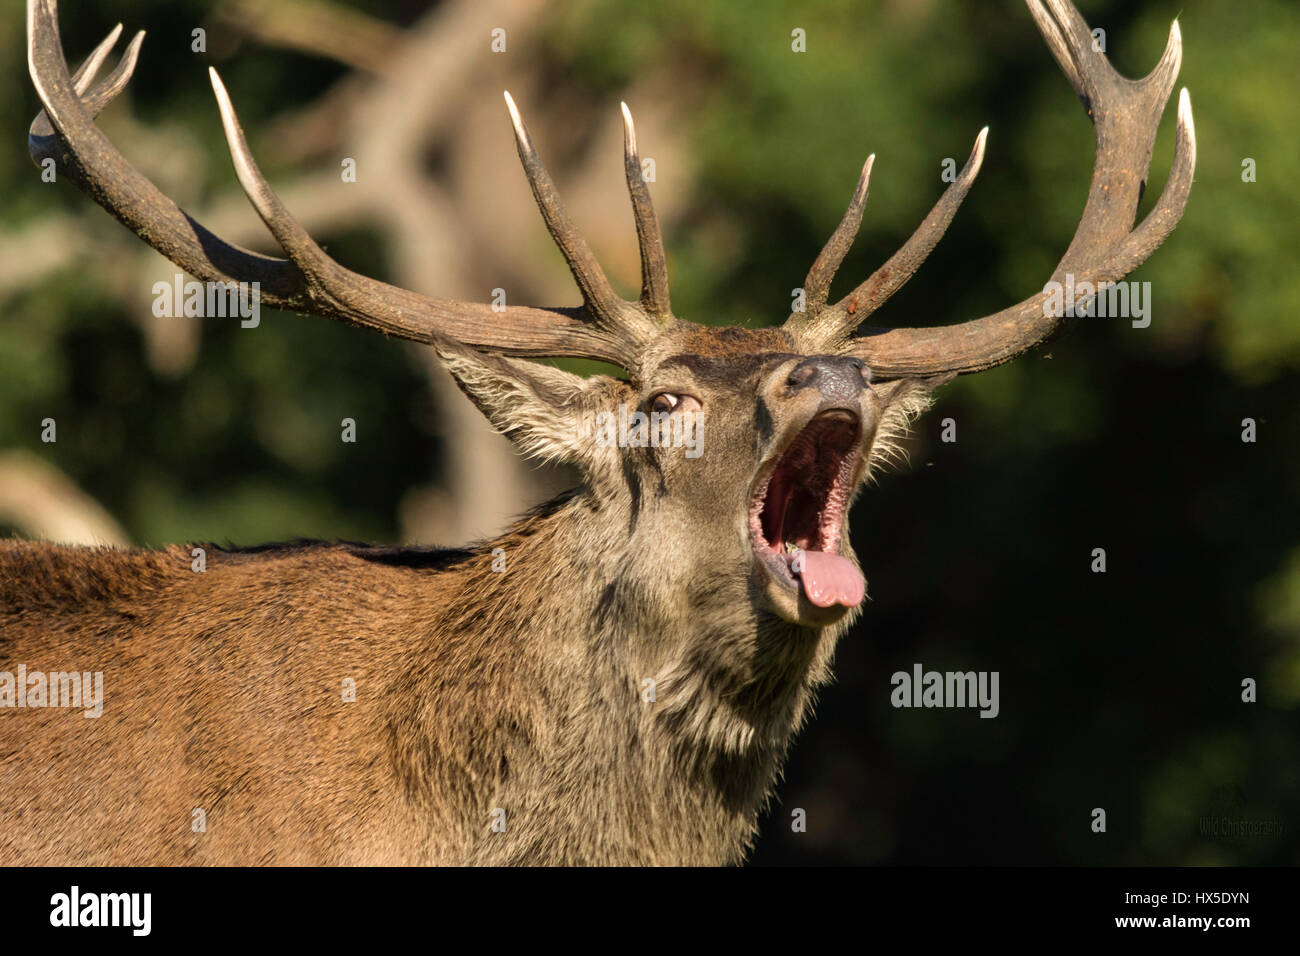 Red Deer (Cervus elaphus). Pictures were taken during the deer rut. It's a very exciting time for deer and a lot for photographers. Stock Photo